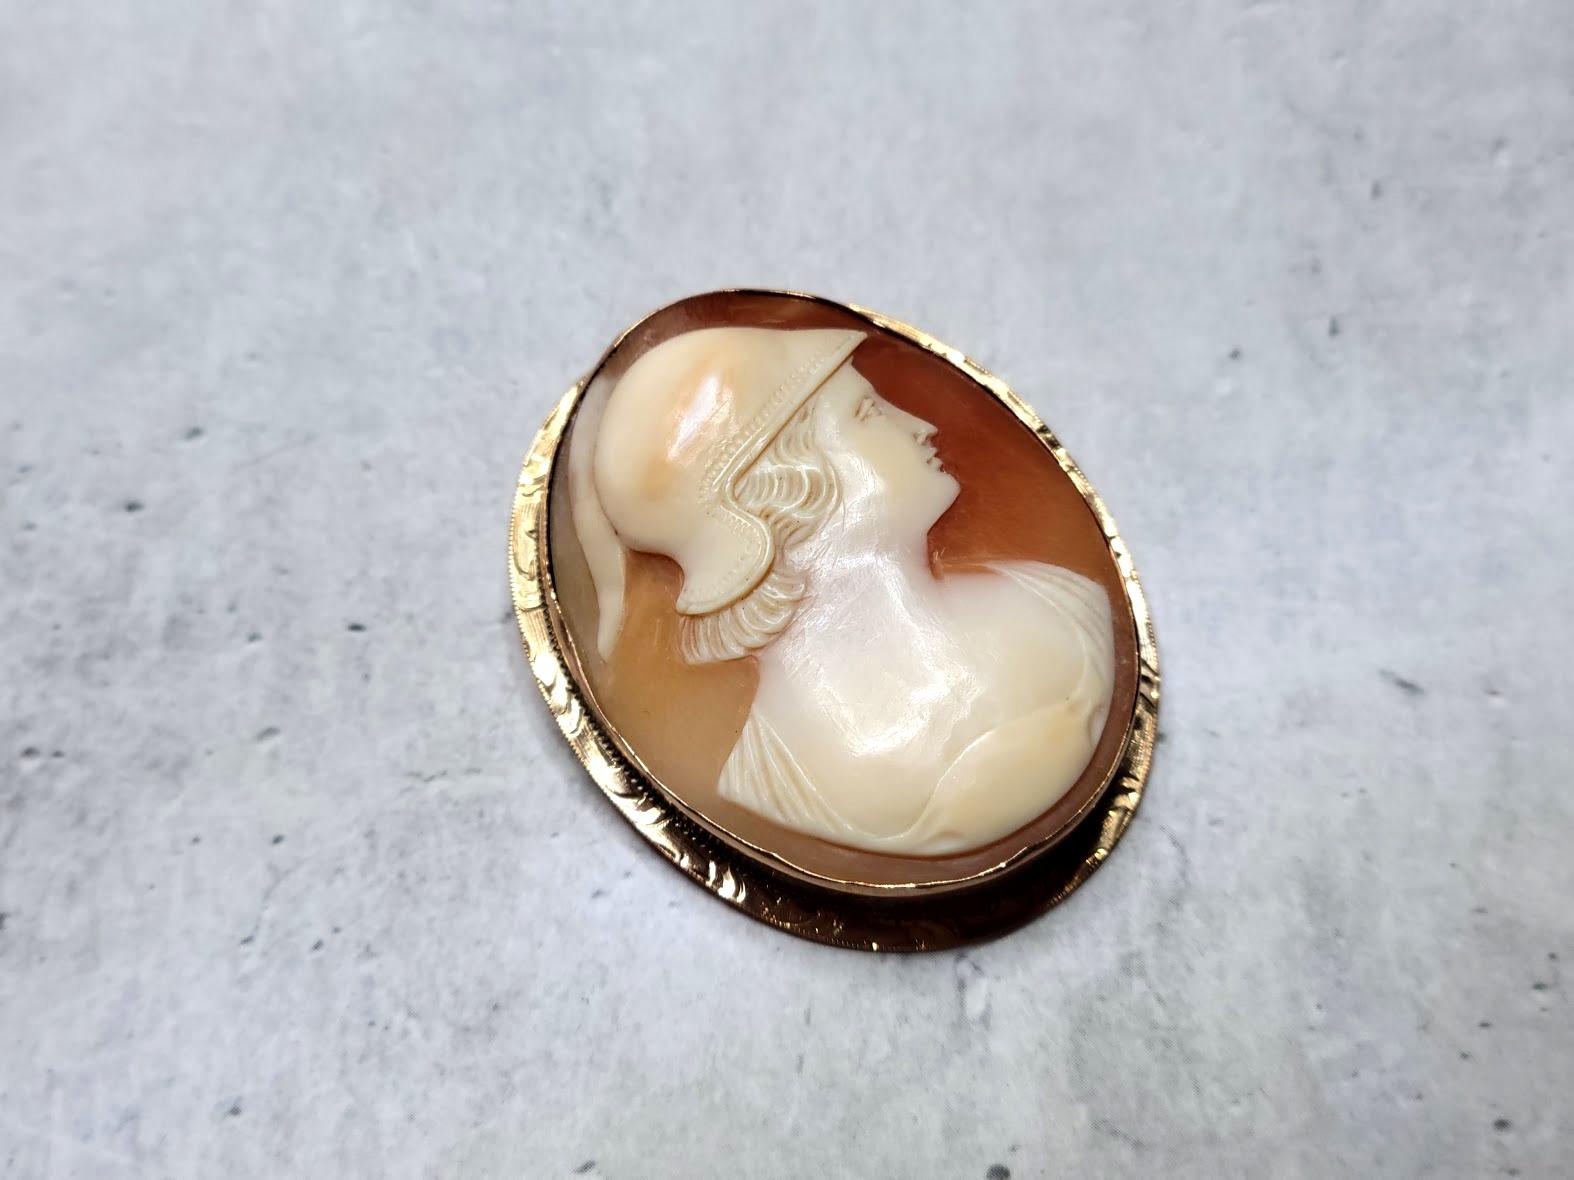 Fabulous carved Victorian brooch made around the late 1800s. The execution of the shell is amazing, and the relief helps to add details and dimension to the design. The frame is 10K yellow gold (on the reverse side of the cameo, there is a stamp